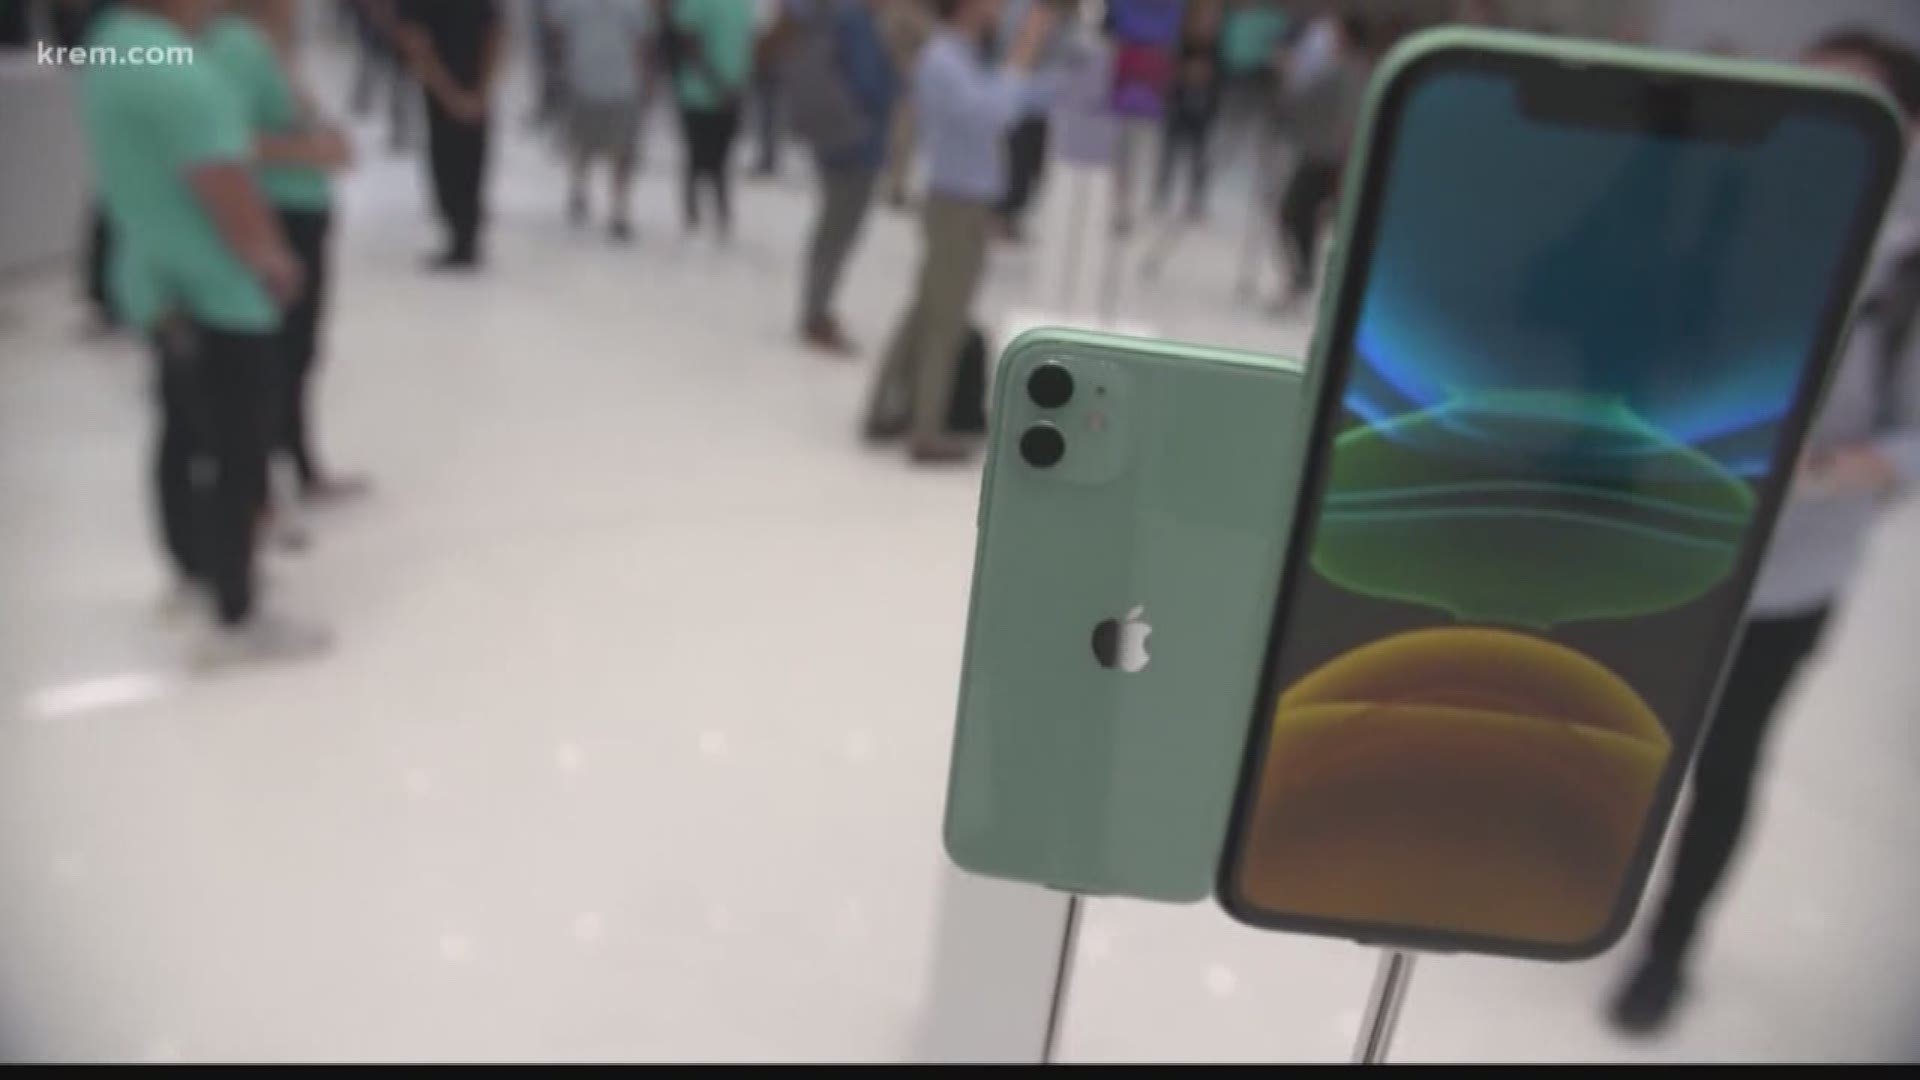 Complaints about iPhone glitches always spike around this time of the year. 
	Some say it is Apple's way of getting you to buy a new one, but is there more to it?